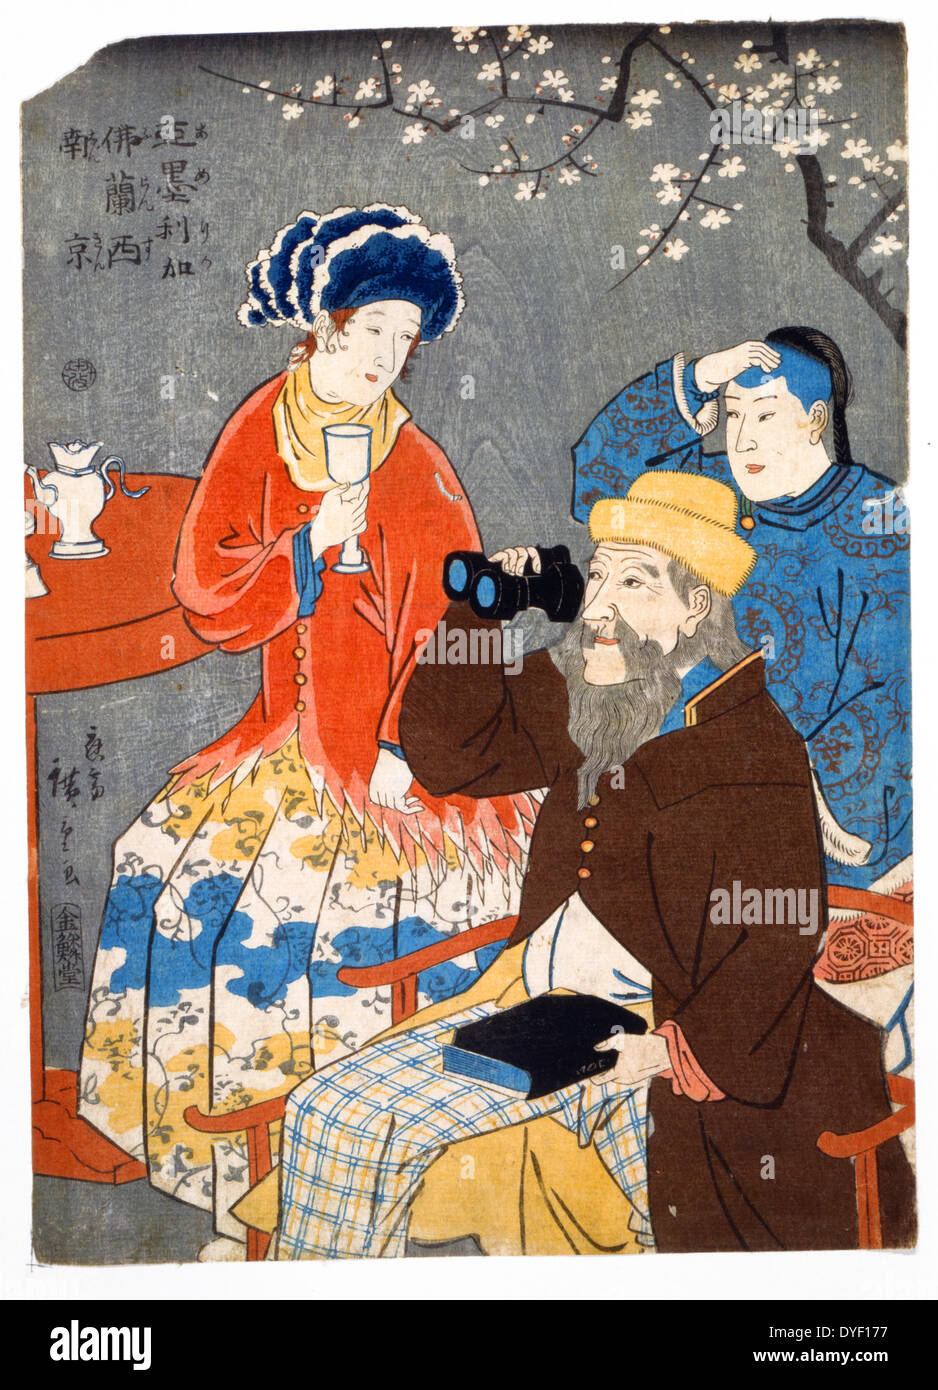 Amerika, Furansu, Nankin (American, French, Chinese). by Hiroshige Utagawa, 1826?-1869, Japanese artist. 1860. Japanese print shows three spectators viewing an unseen object or event: a woman holding a drinking vessel sits beside a man gazing through binoculars while a Chinese man touches his head. Stock Photo